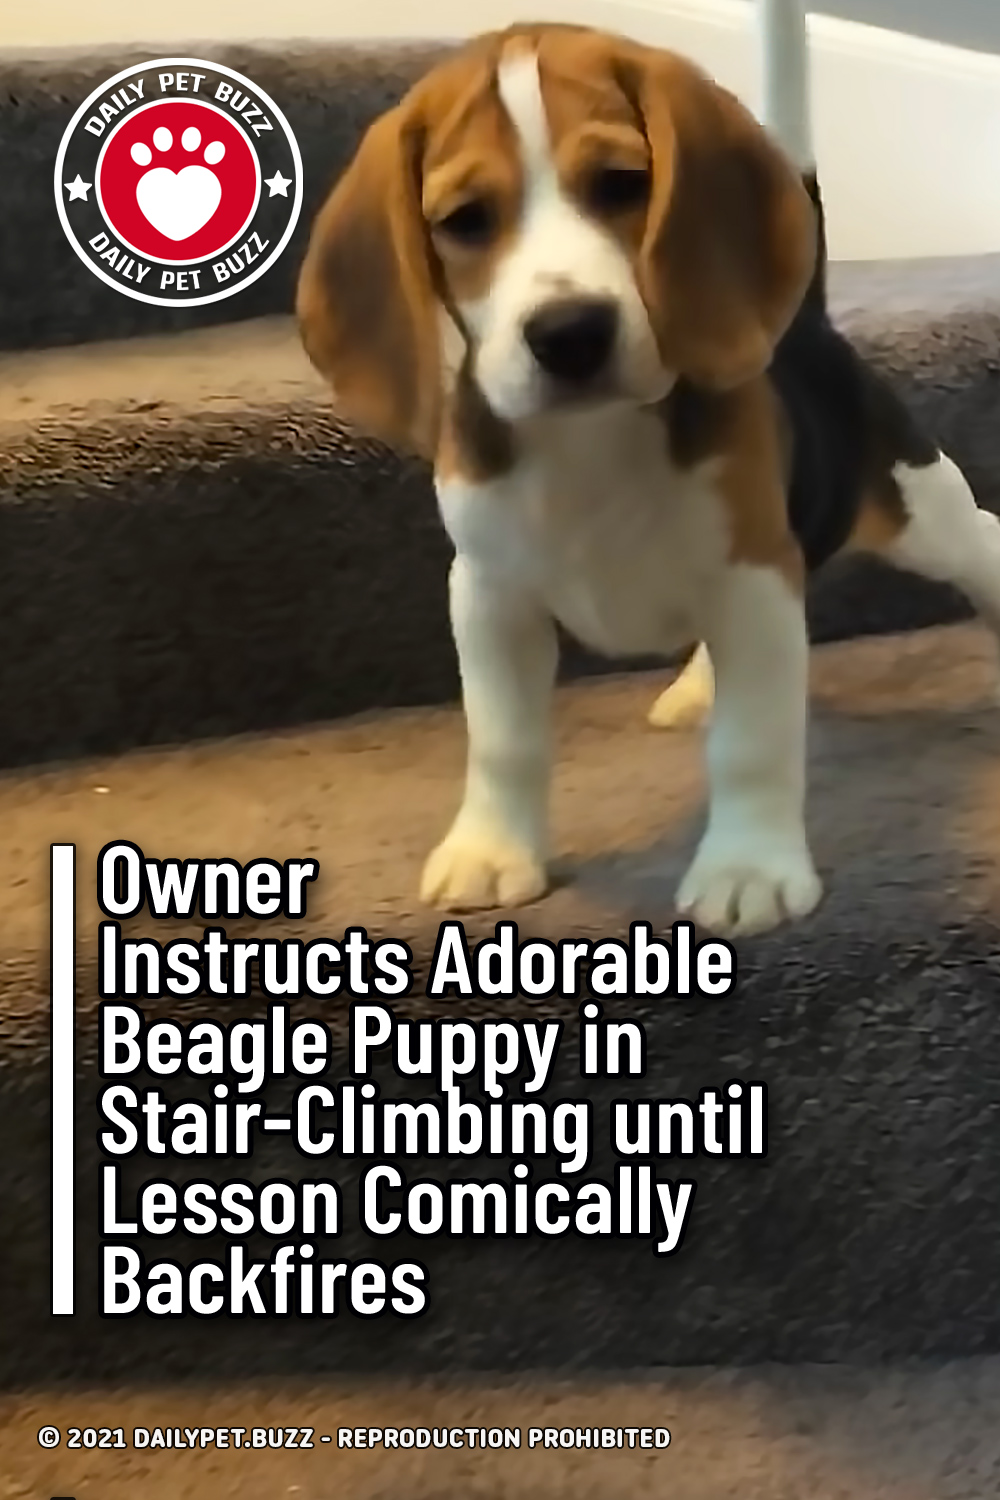 Owner Instructs Adorable Beagle Puppy in Stair-Climbing until Lesson Comically Backfires